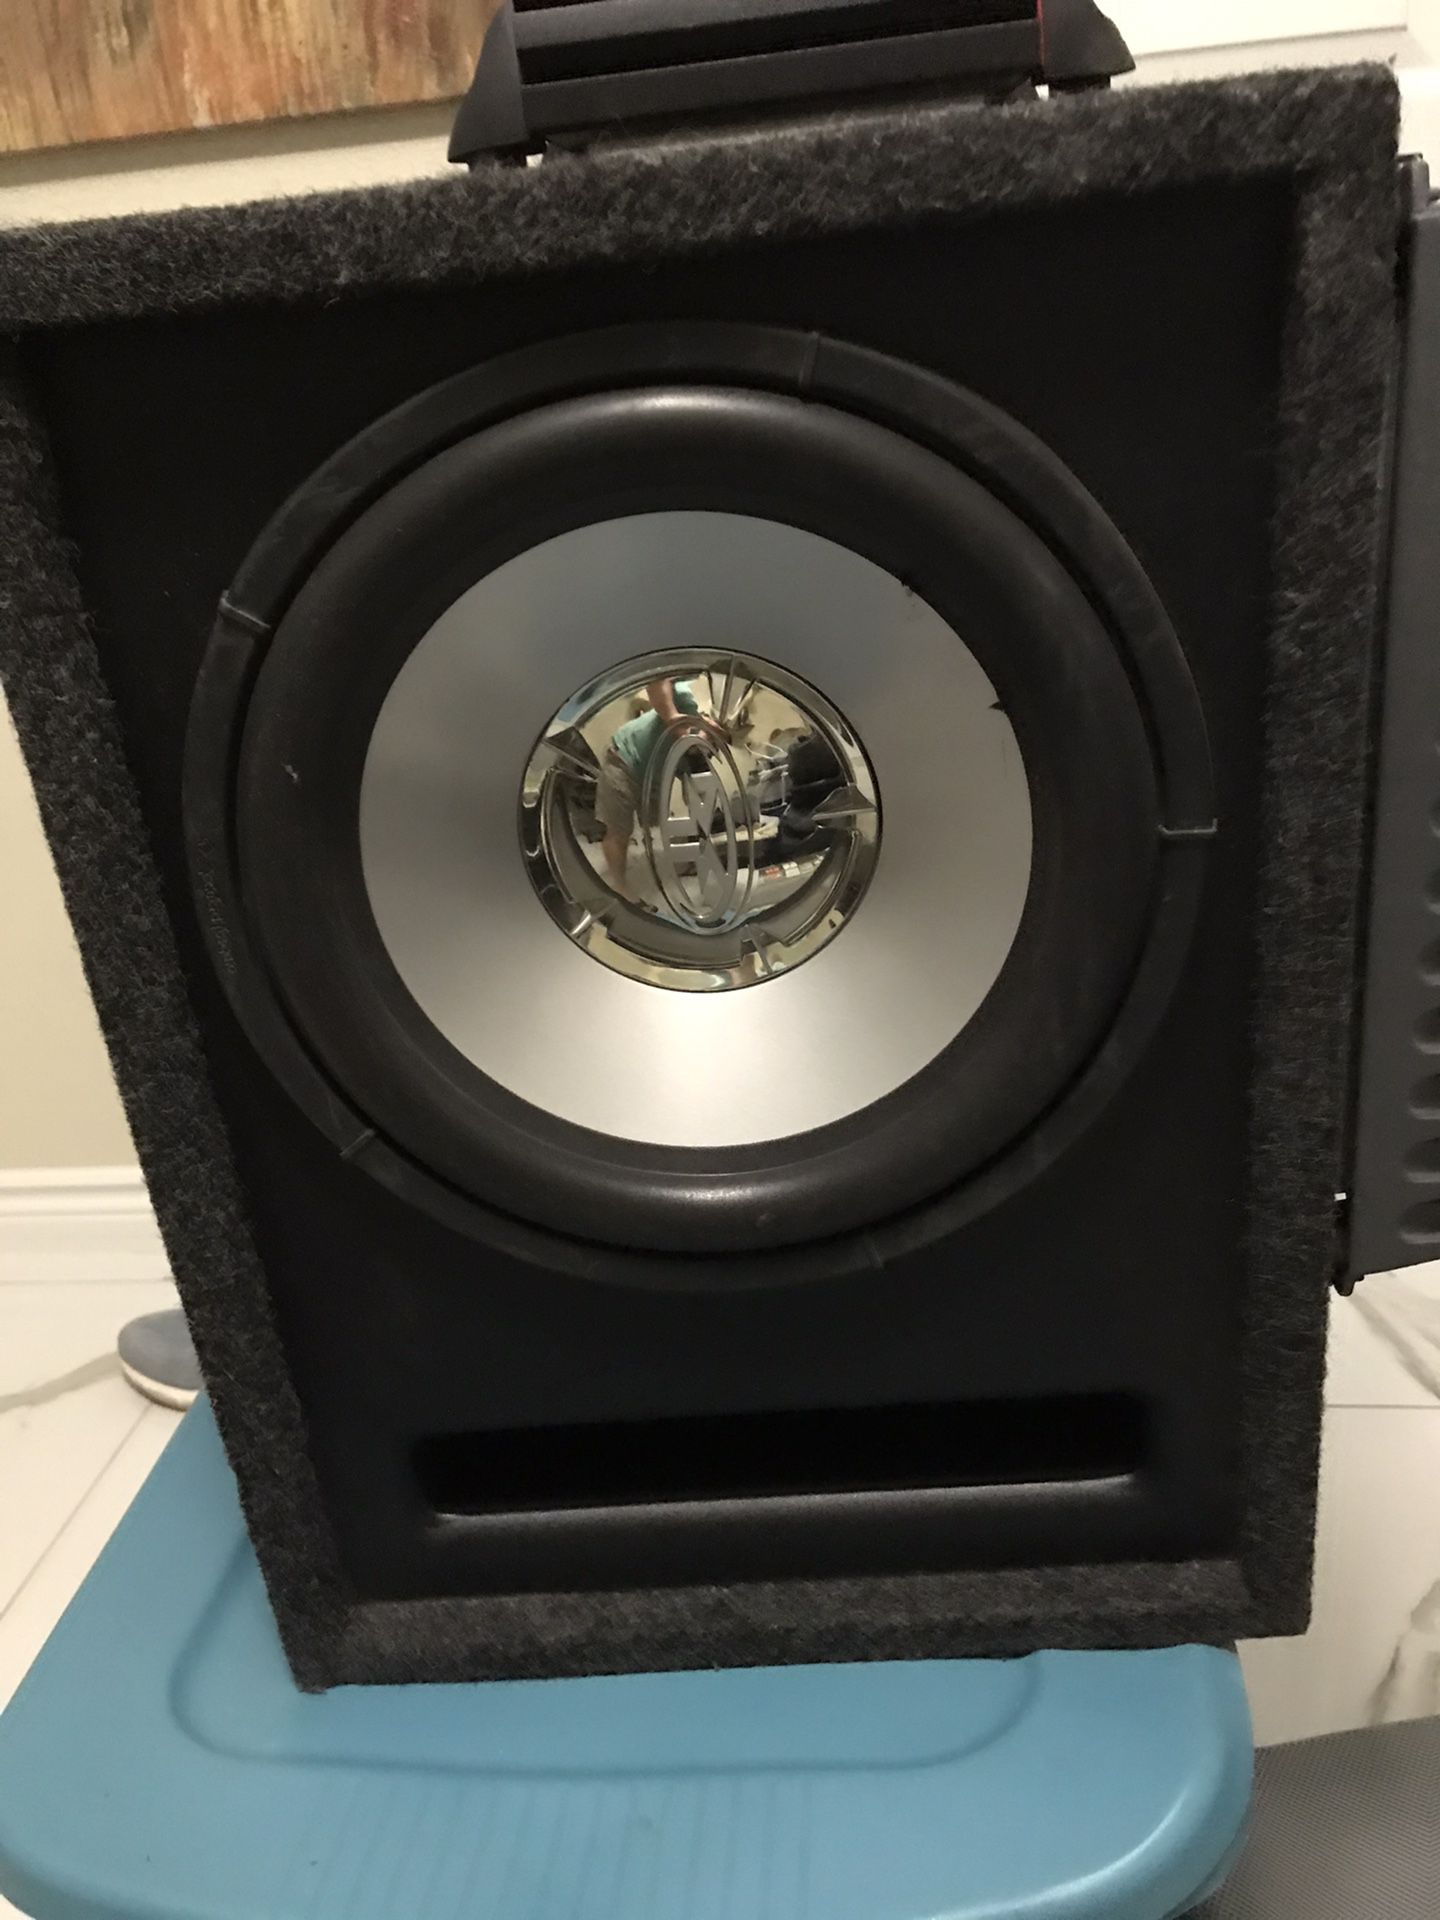 Subwoofer+2 Amps Rockford Fosgate+ MTX NOT RUSH TO SELL IT.